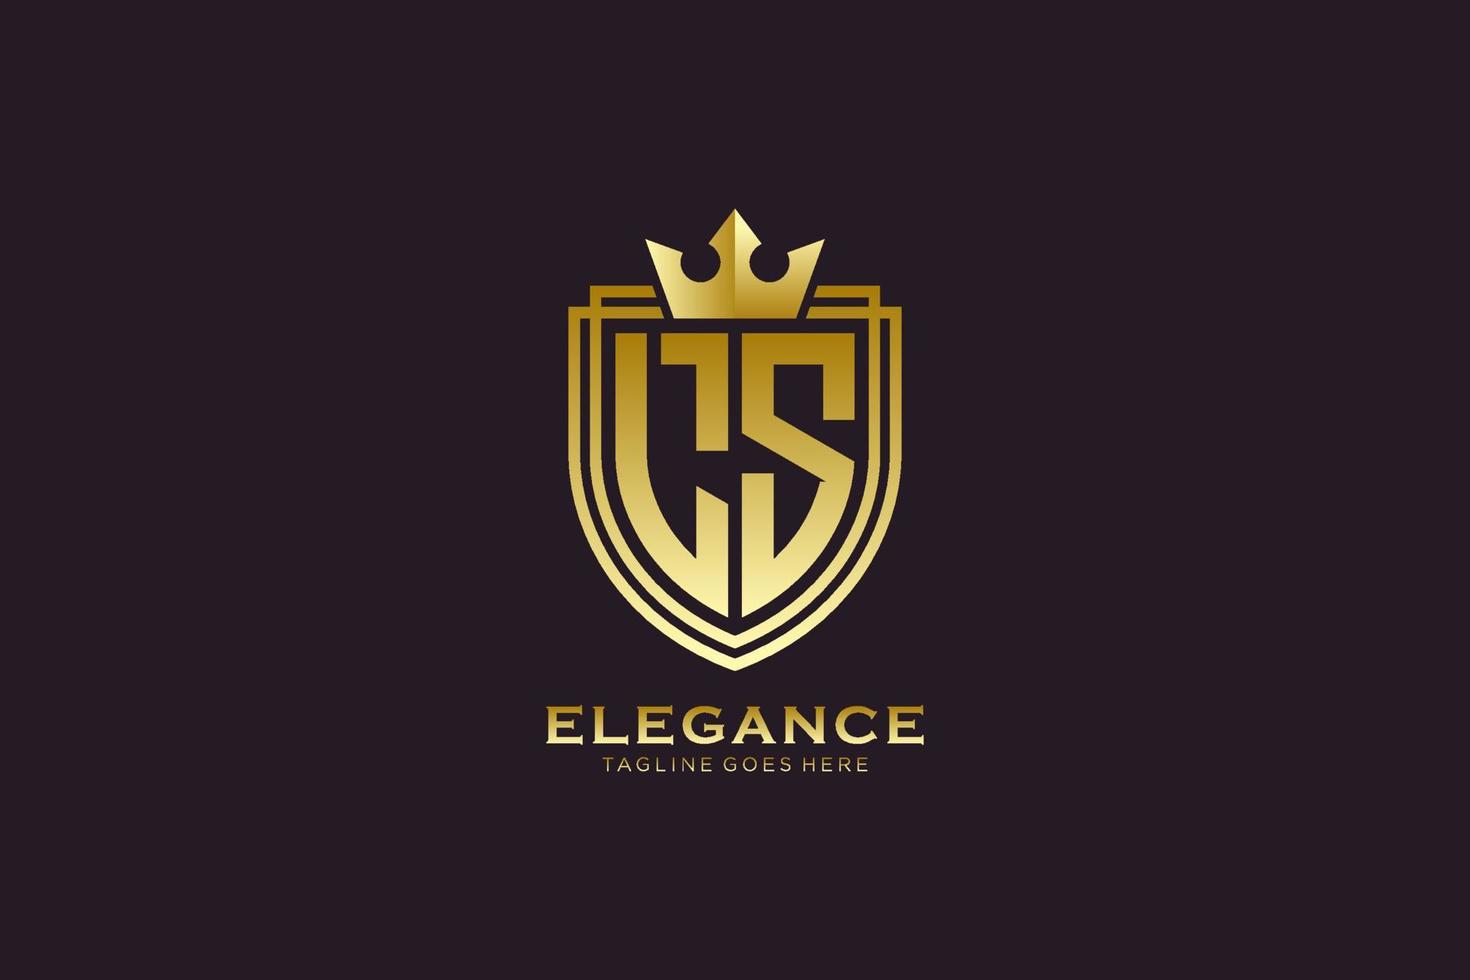 initial LS elegant luxury monogram logo or badge template with scrolls and royal crown - perfect for luxurious branding projects vector